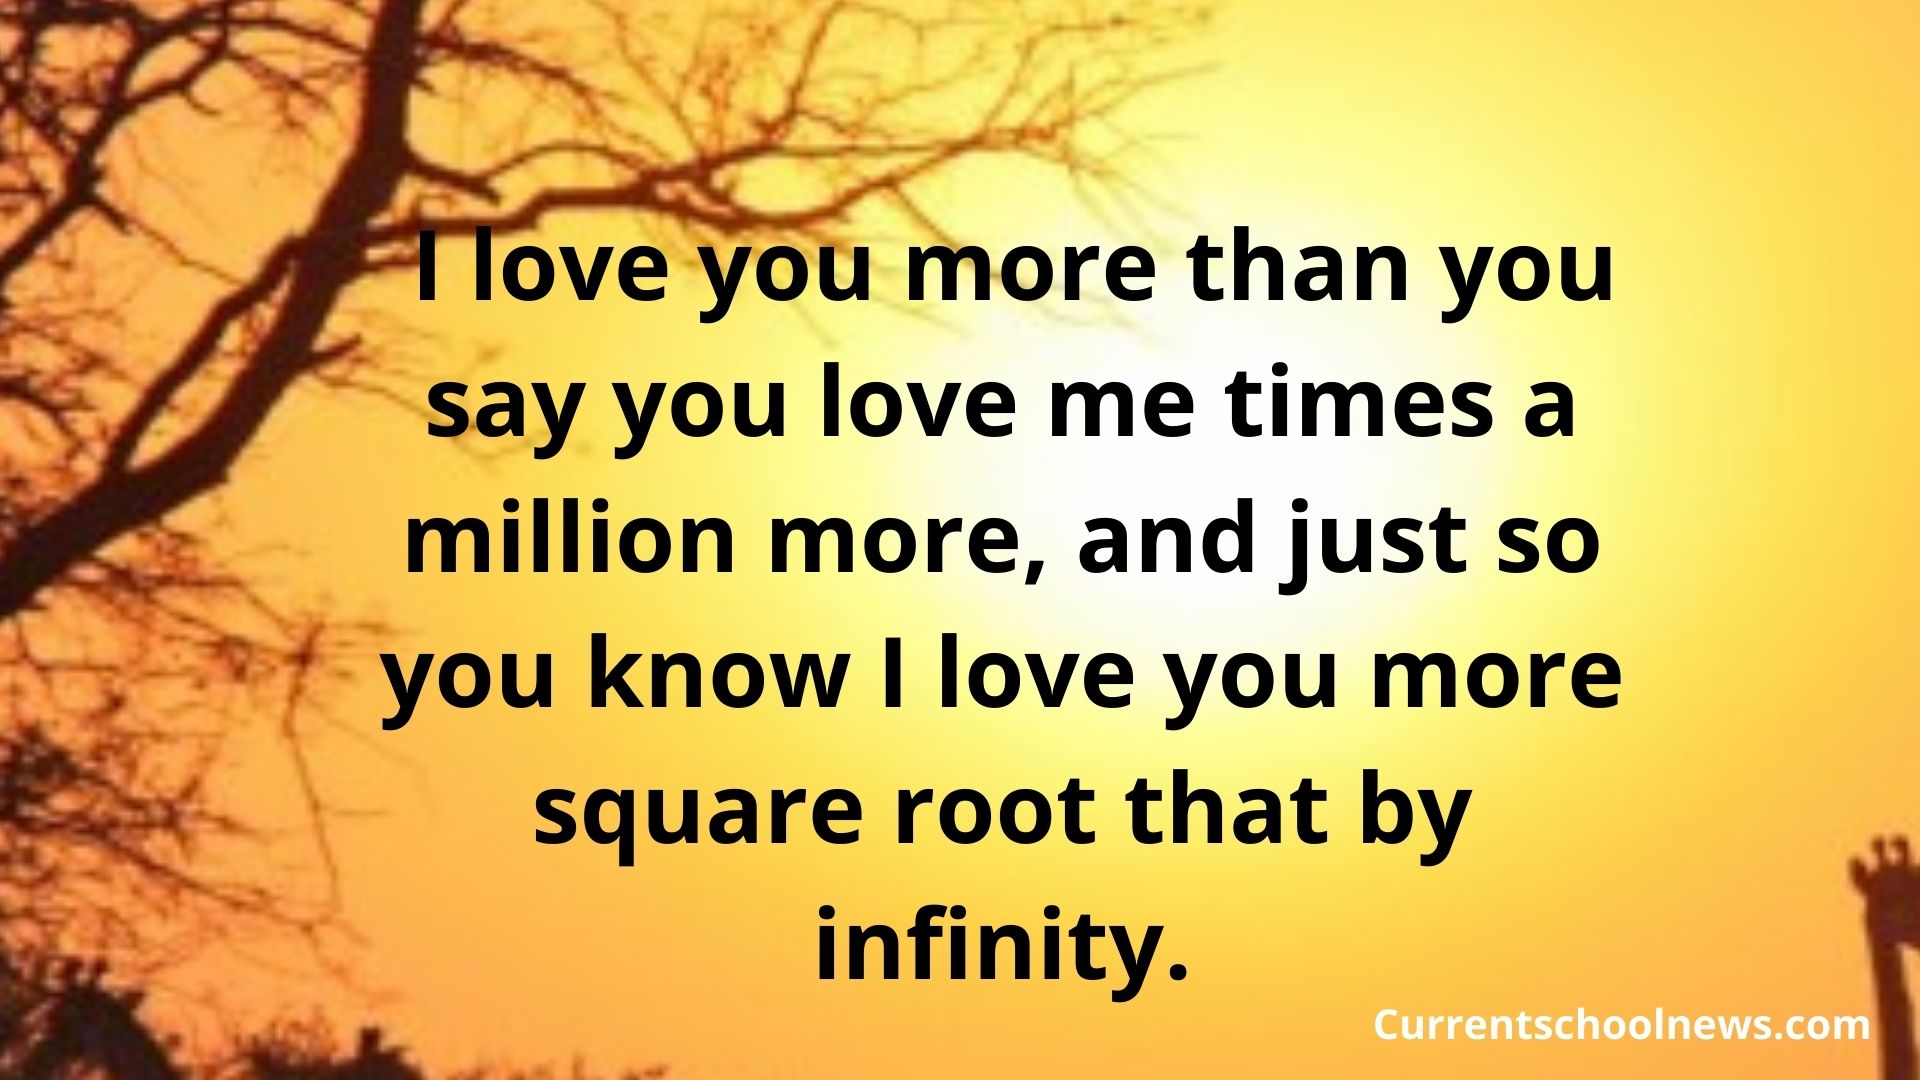 When i Say i Love you More Quotes